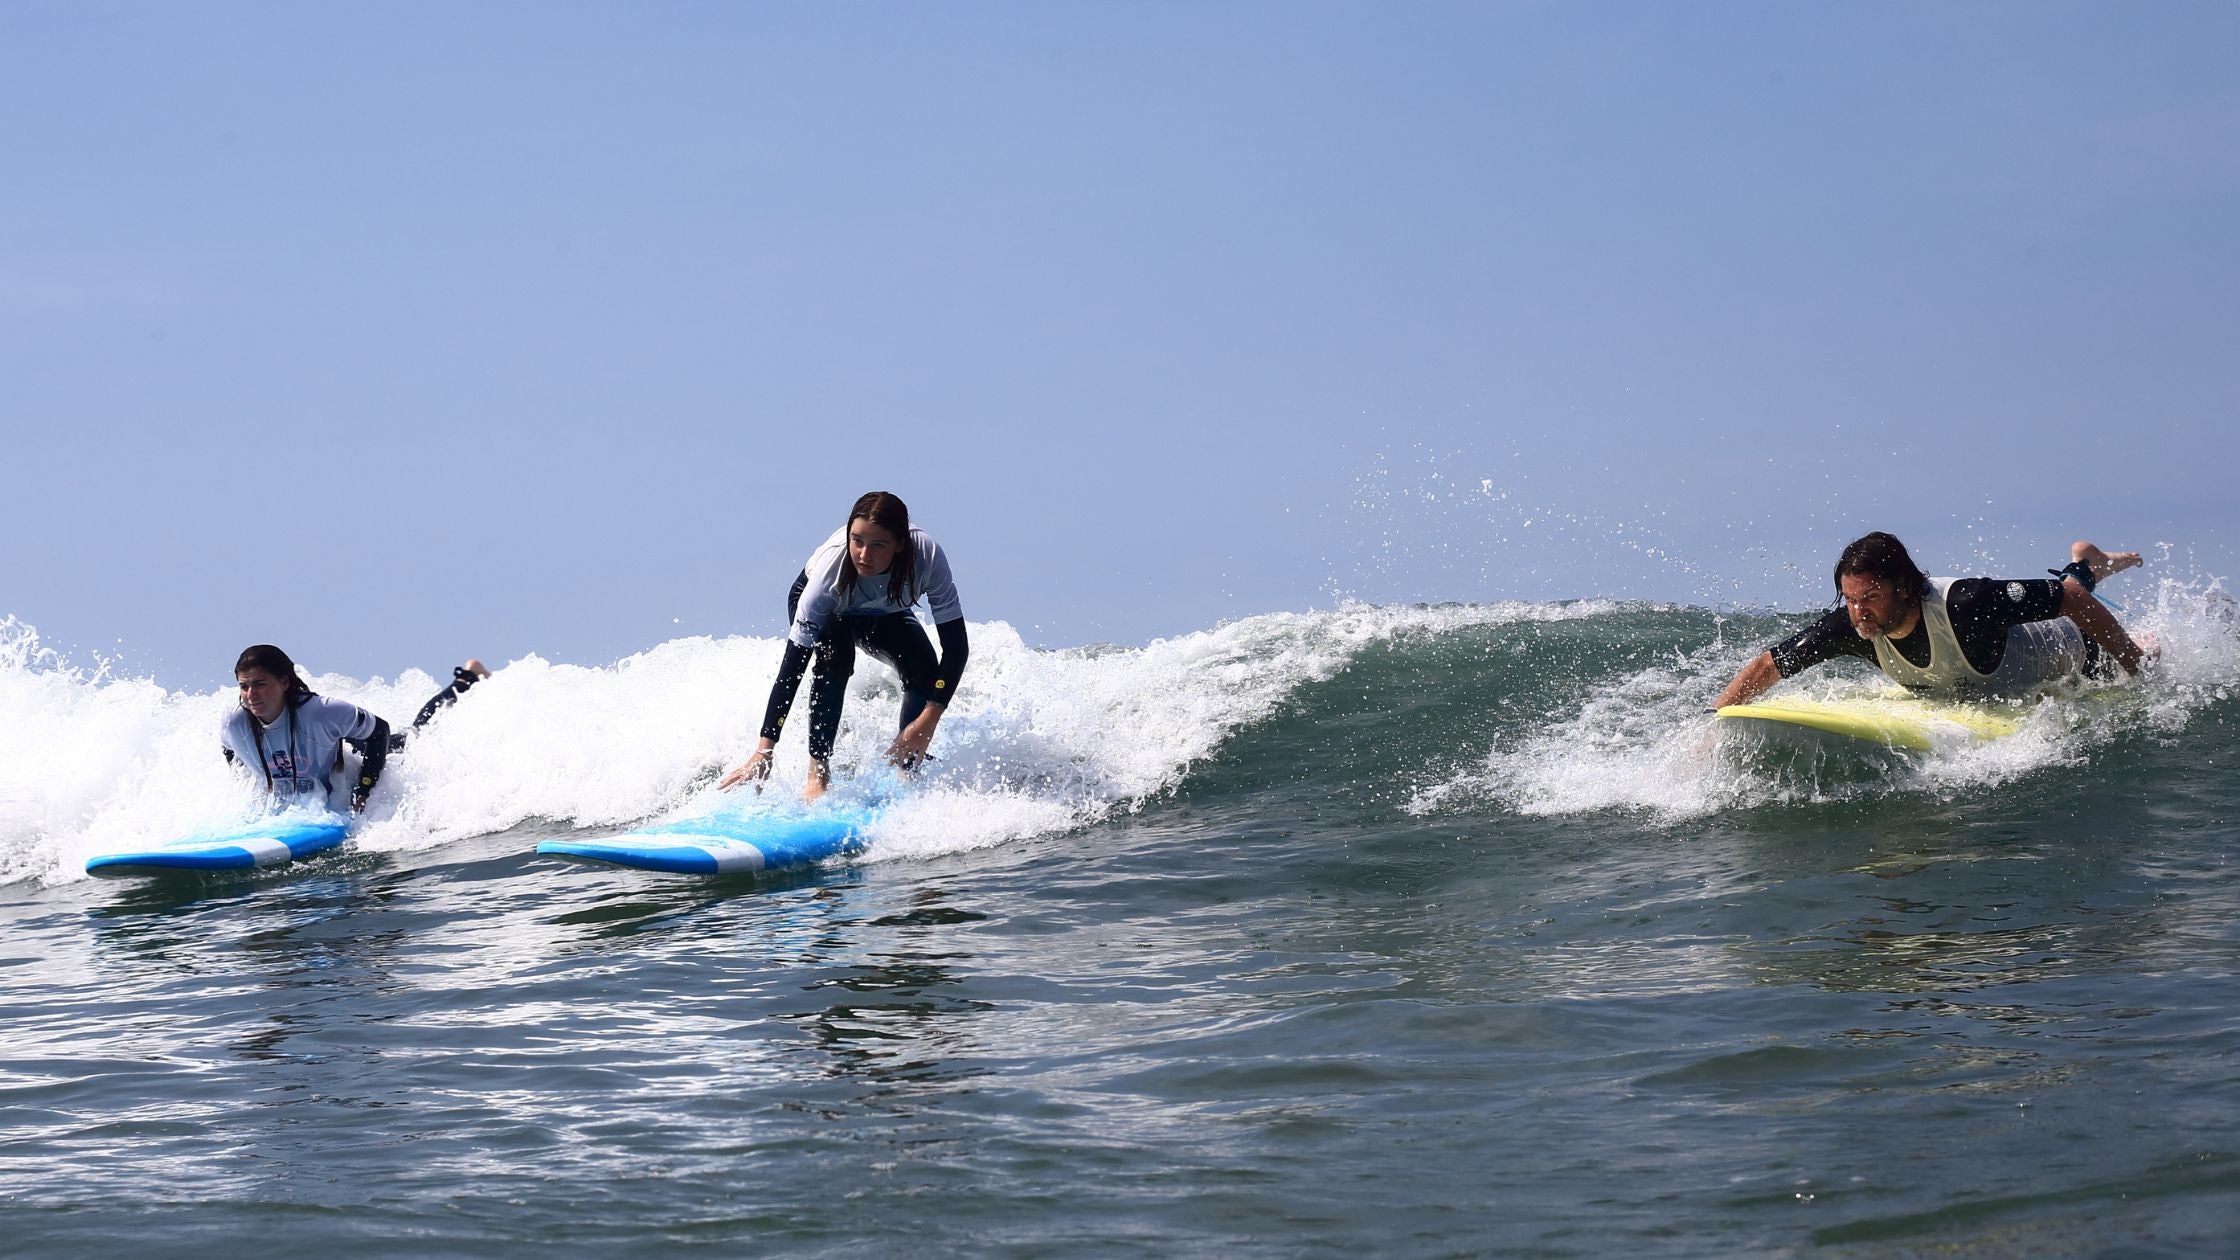 Beginners catching their first waves in surfing